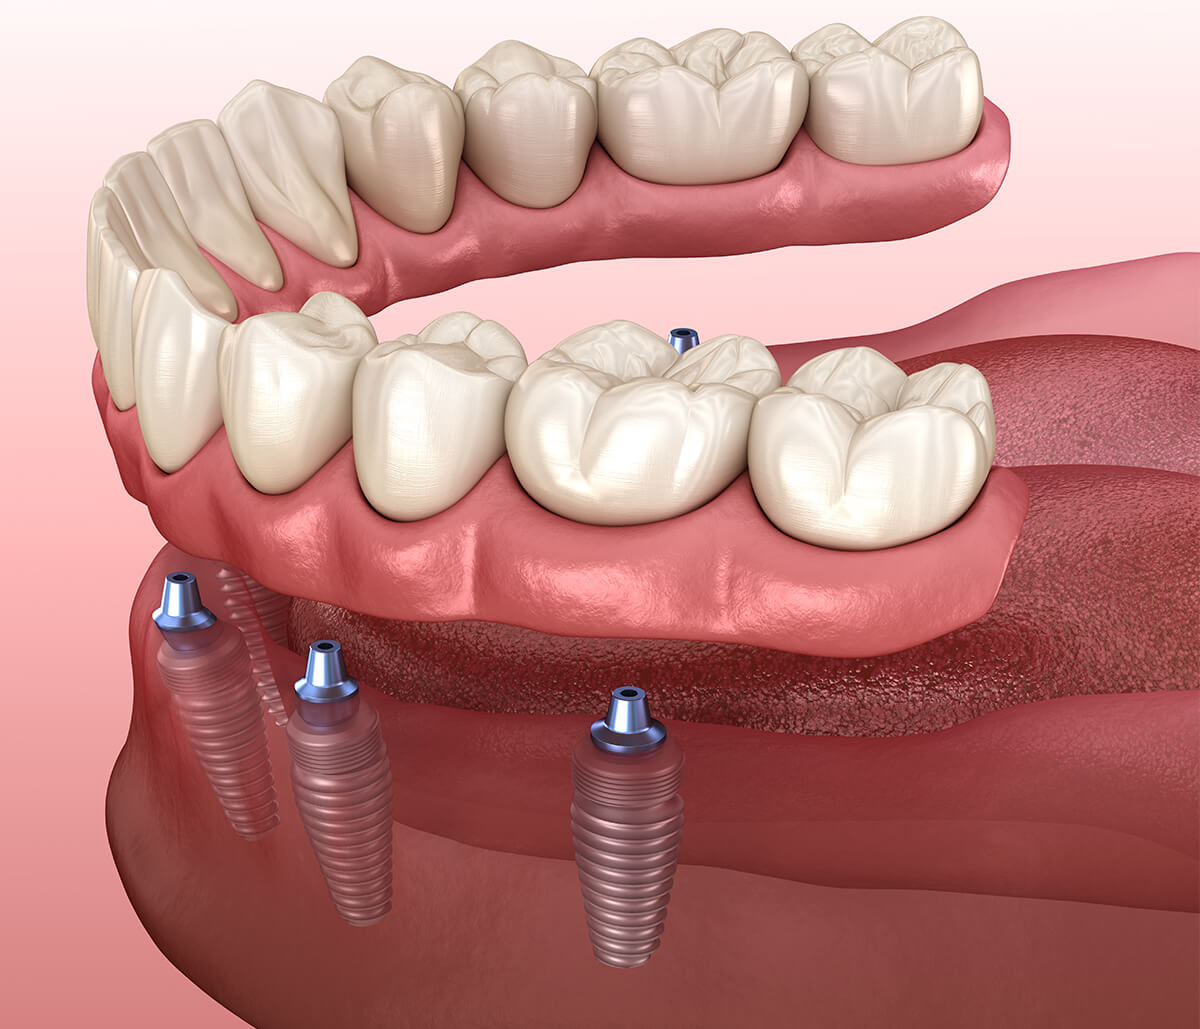 Implant-Supported Dentures in San Francisco Area